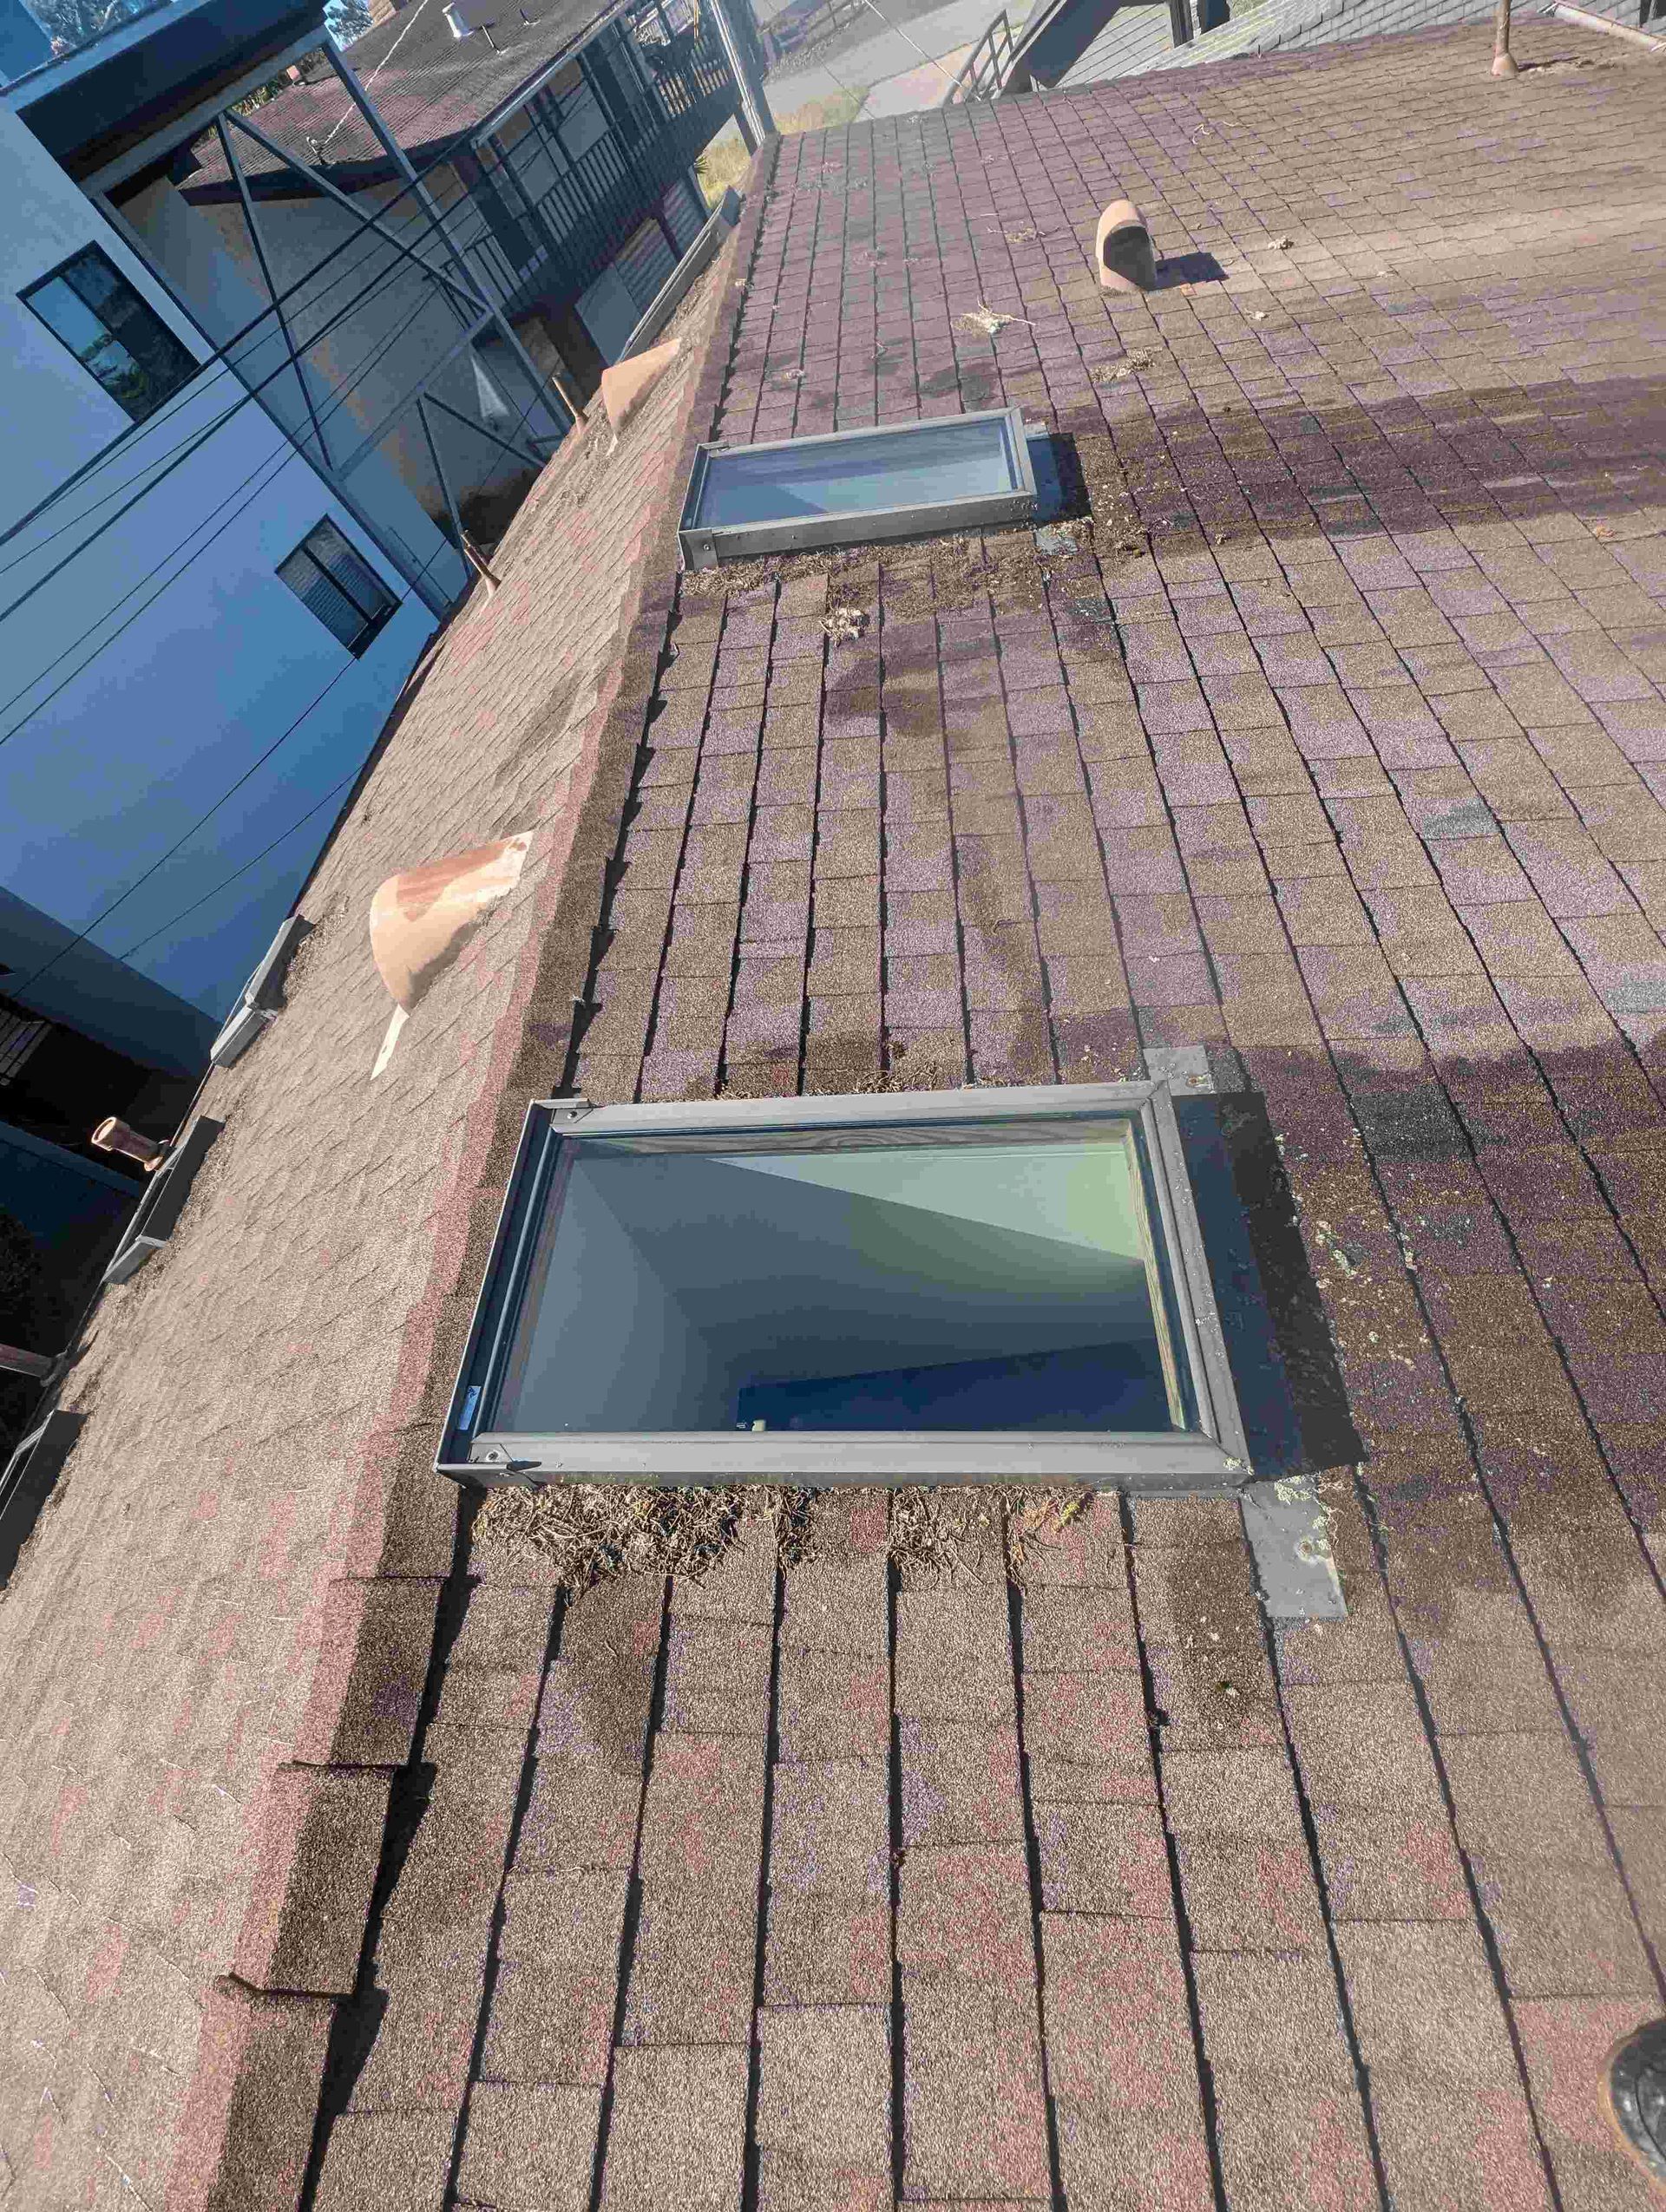 There is a skylight on the roof of a building.